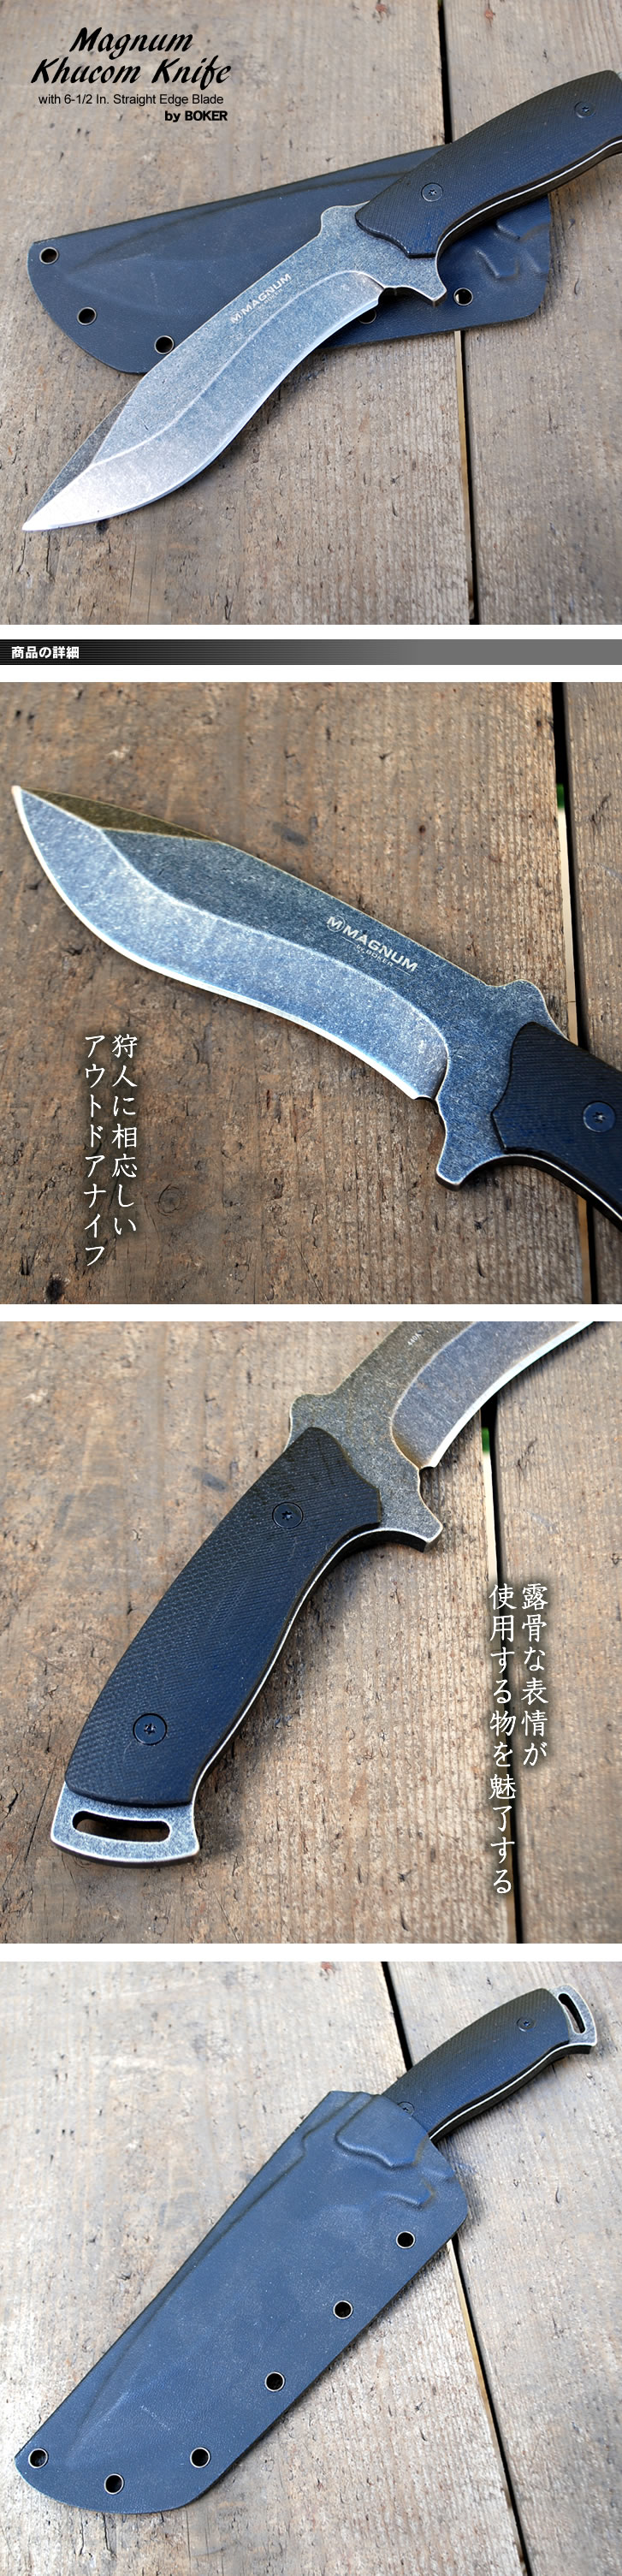 Magnum 02MB523 Khucom Knife with 6-1/2 In. Straight Edge Blade/  결ȥ襯